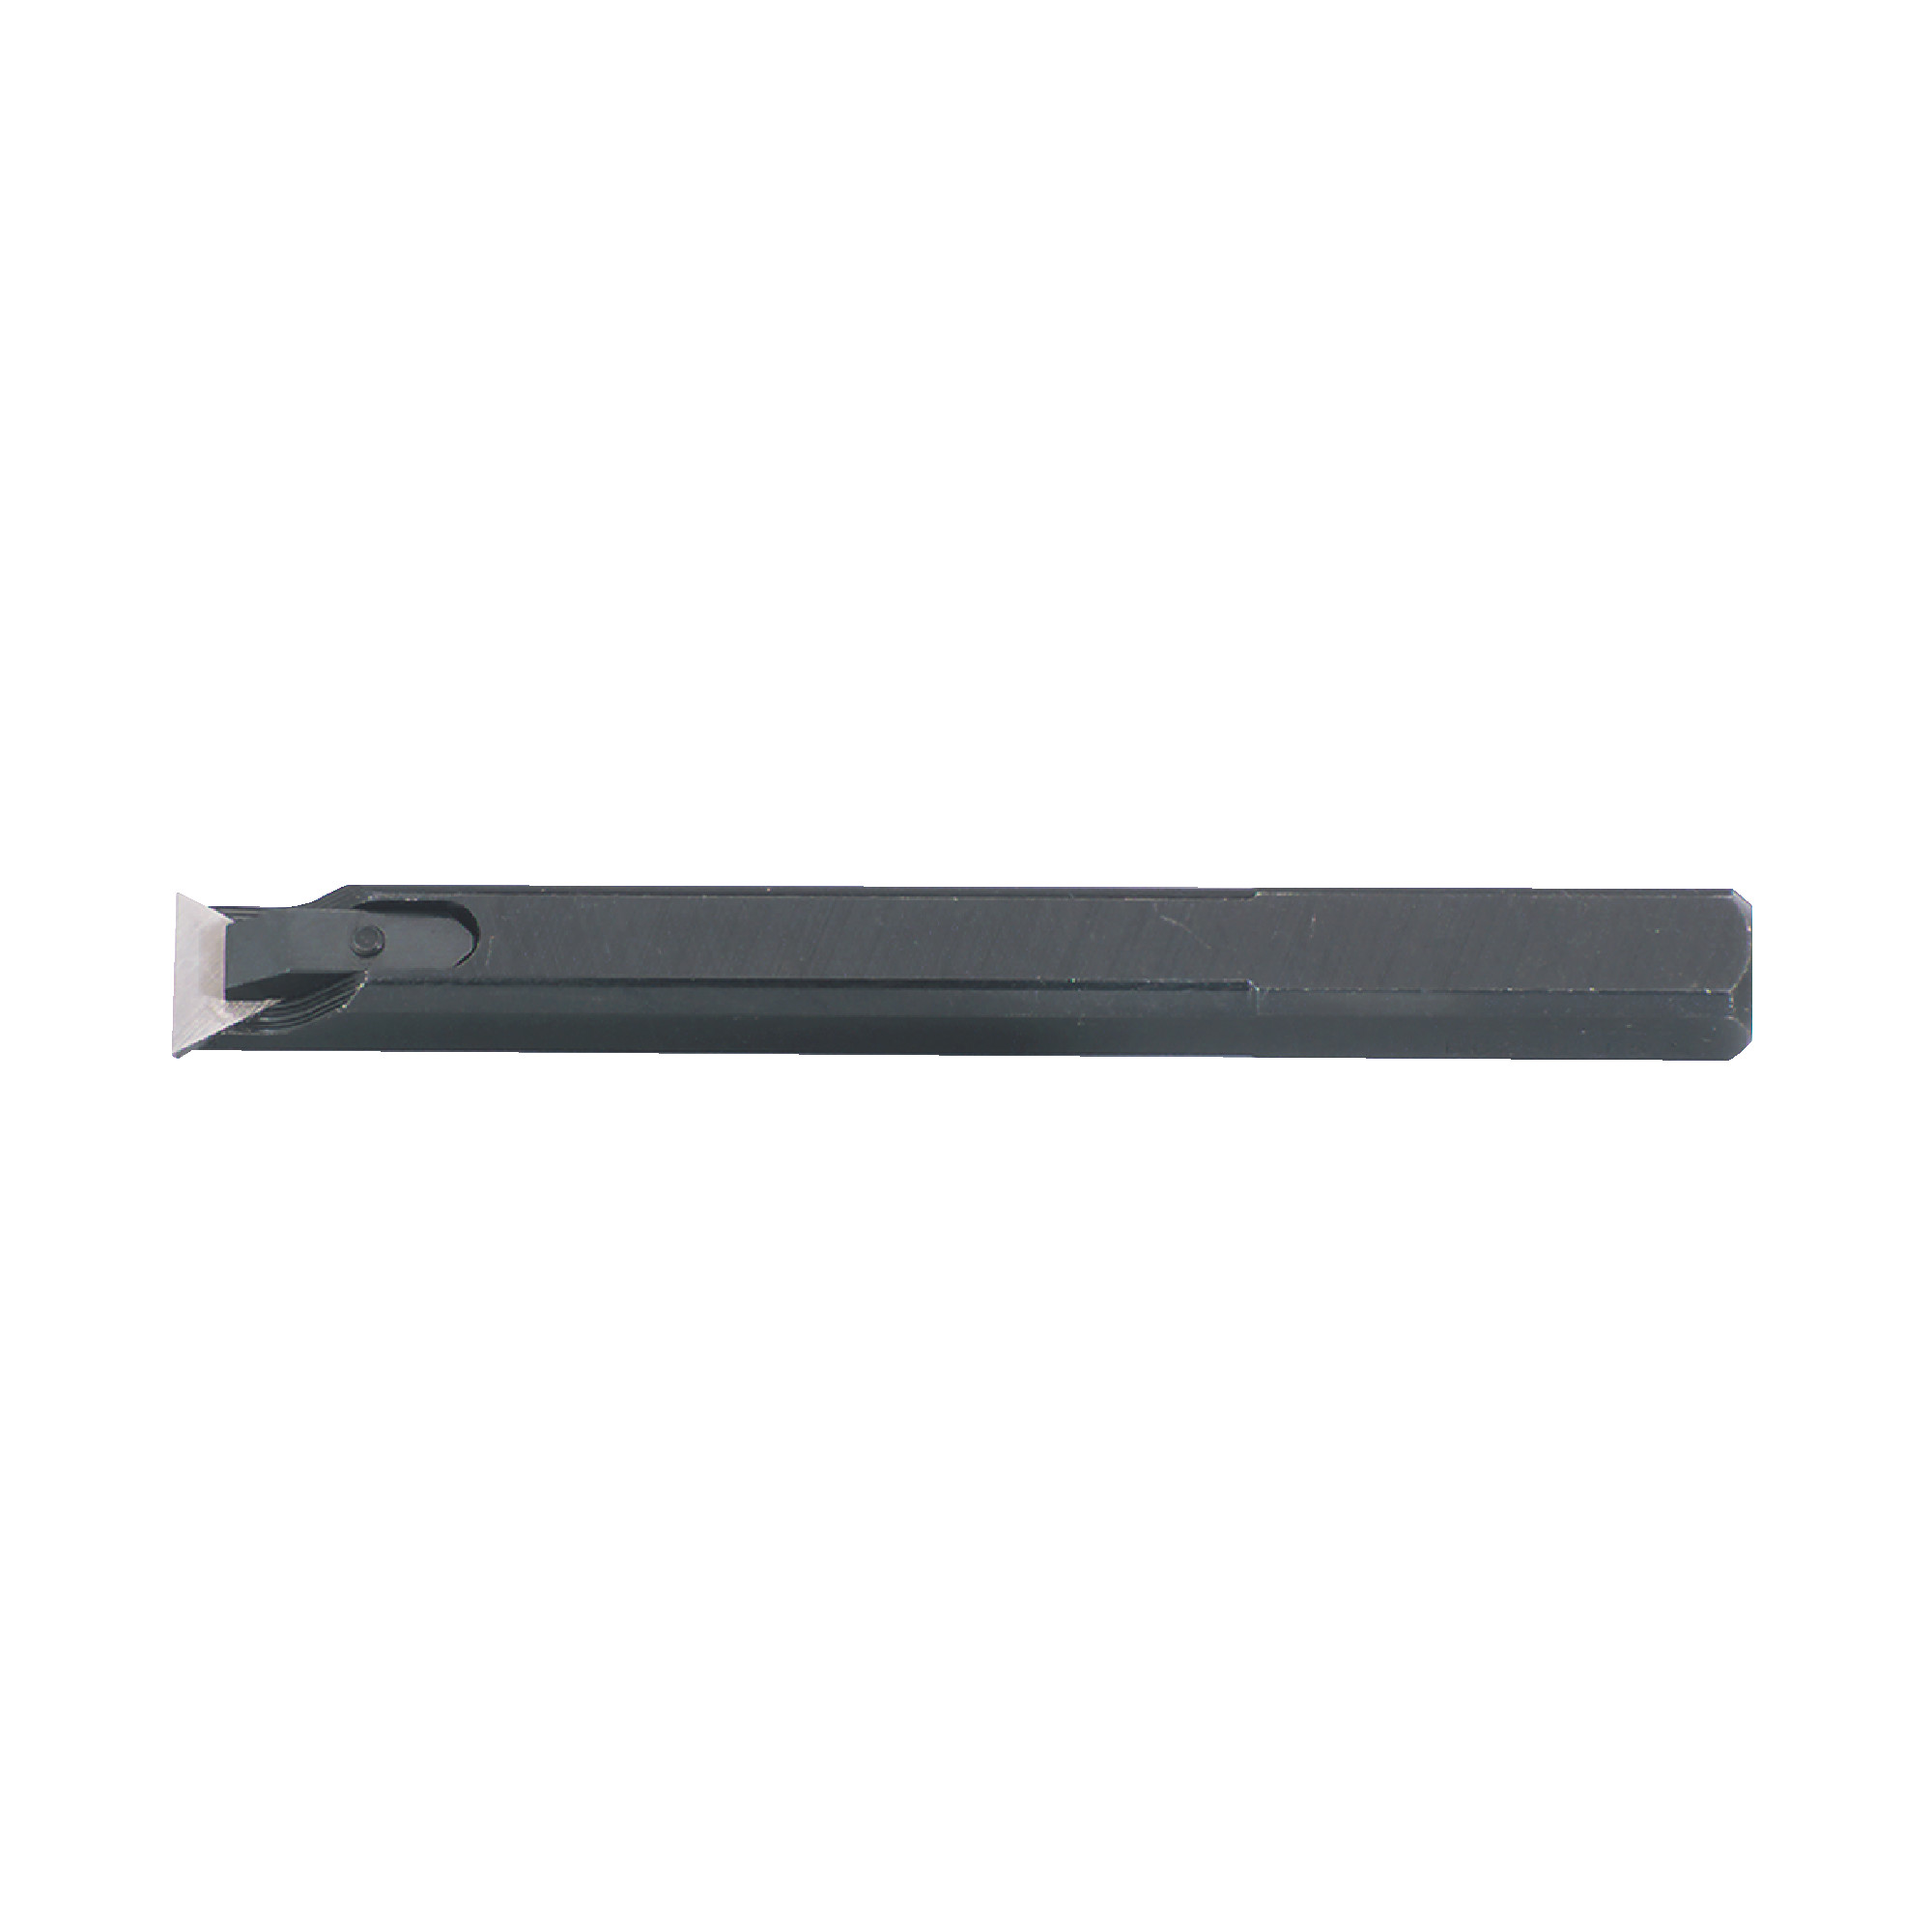 ROUSE - B500L Boring Bar / 0.625" Shank / 3.00" Length of Cut / TPEE73_ Inserts / Right Hand